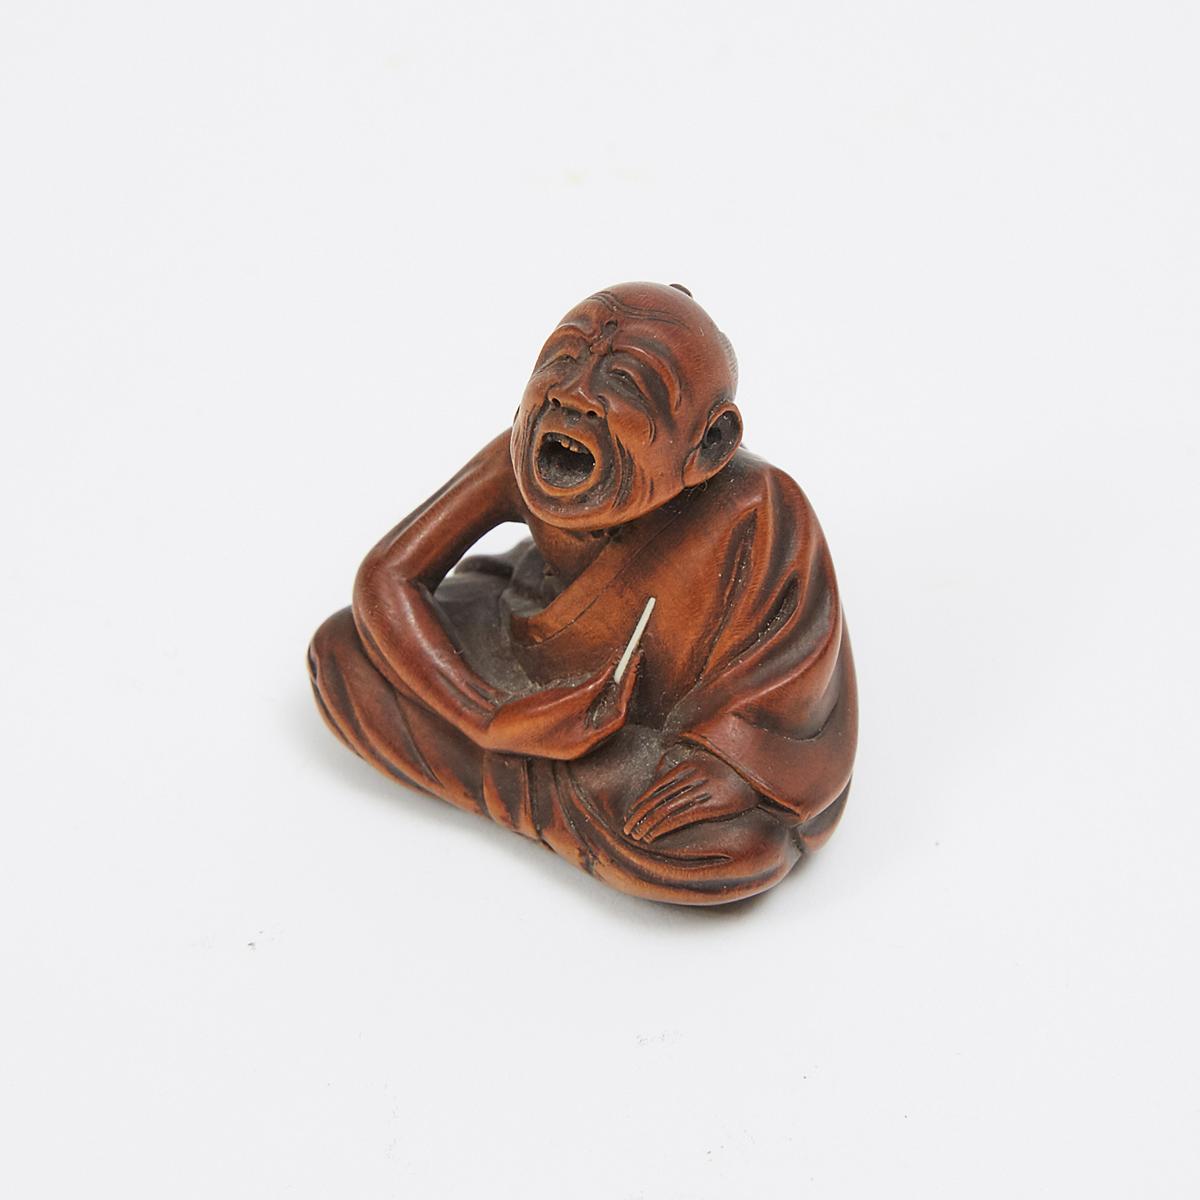 A Boxwood Netsuke of a Professional Sneezer, Signed Gyokkei, Mid-19th Century, 1.5 x 1.5 in — 3.8 x - Image 2 of 4